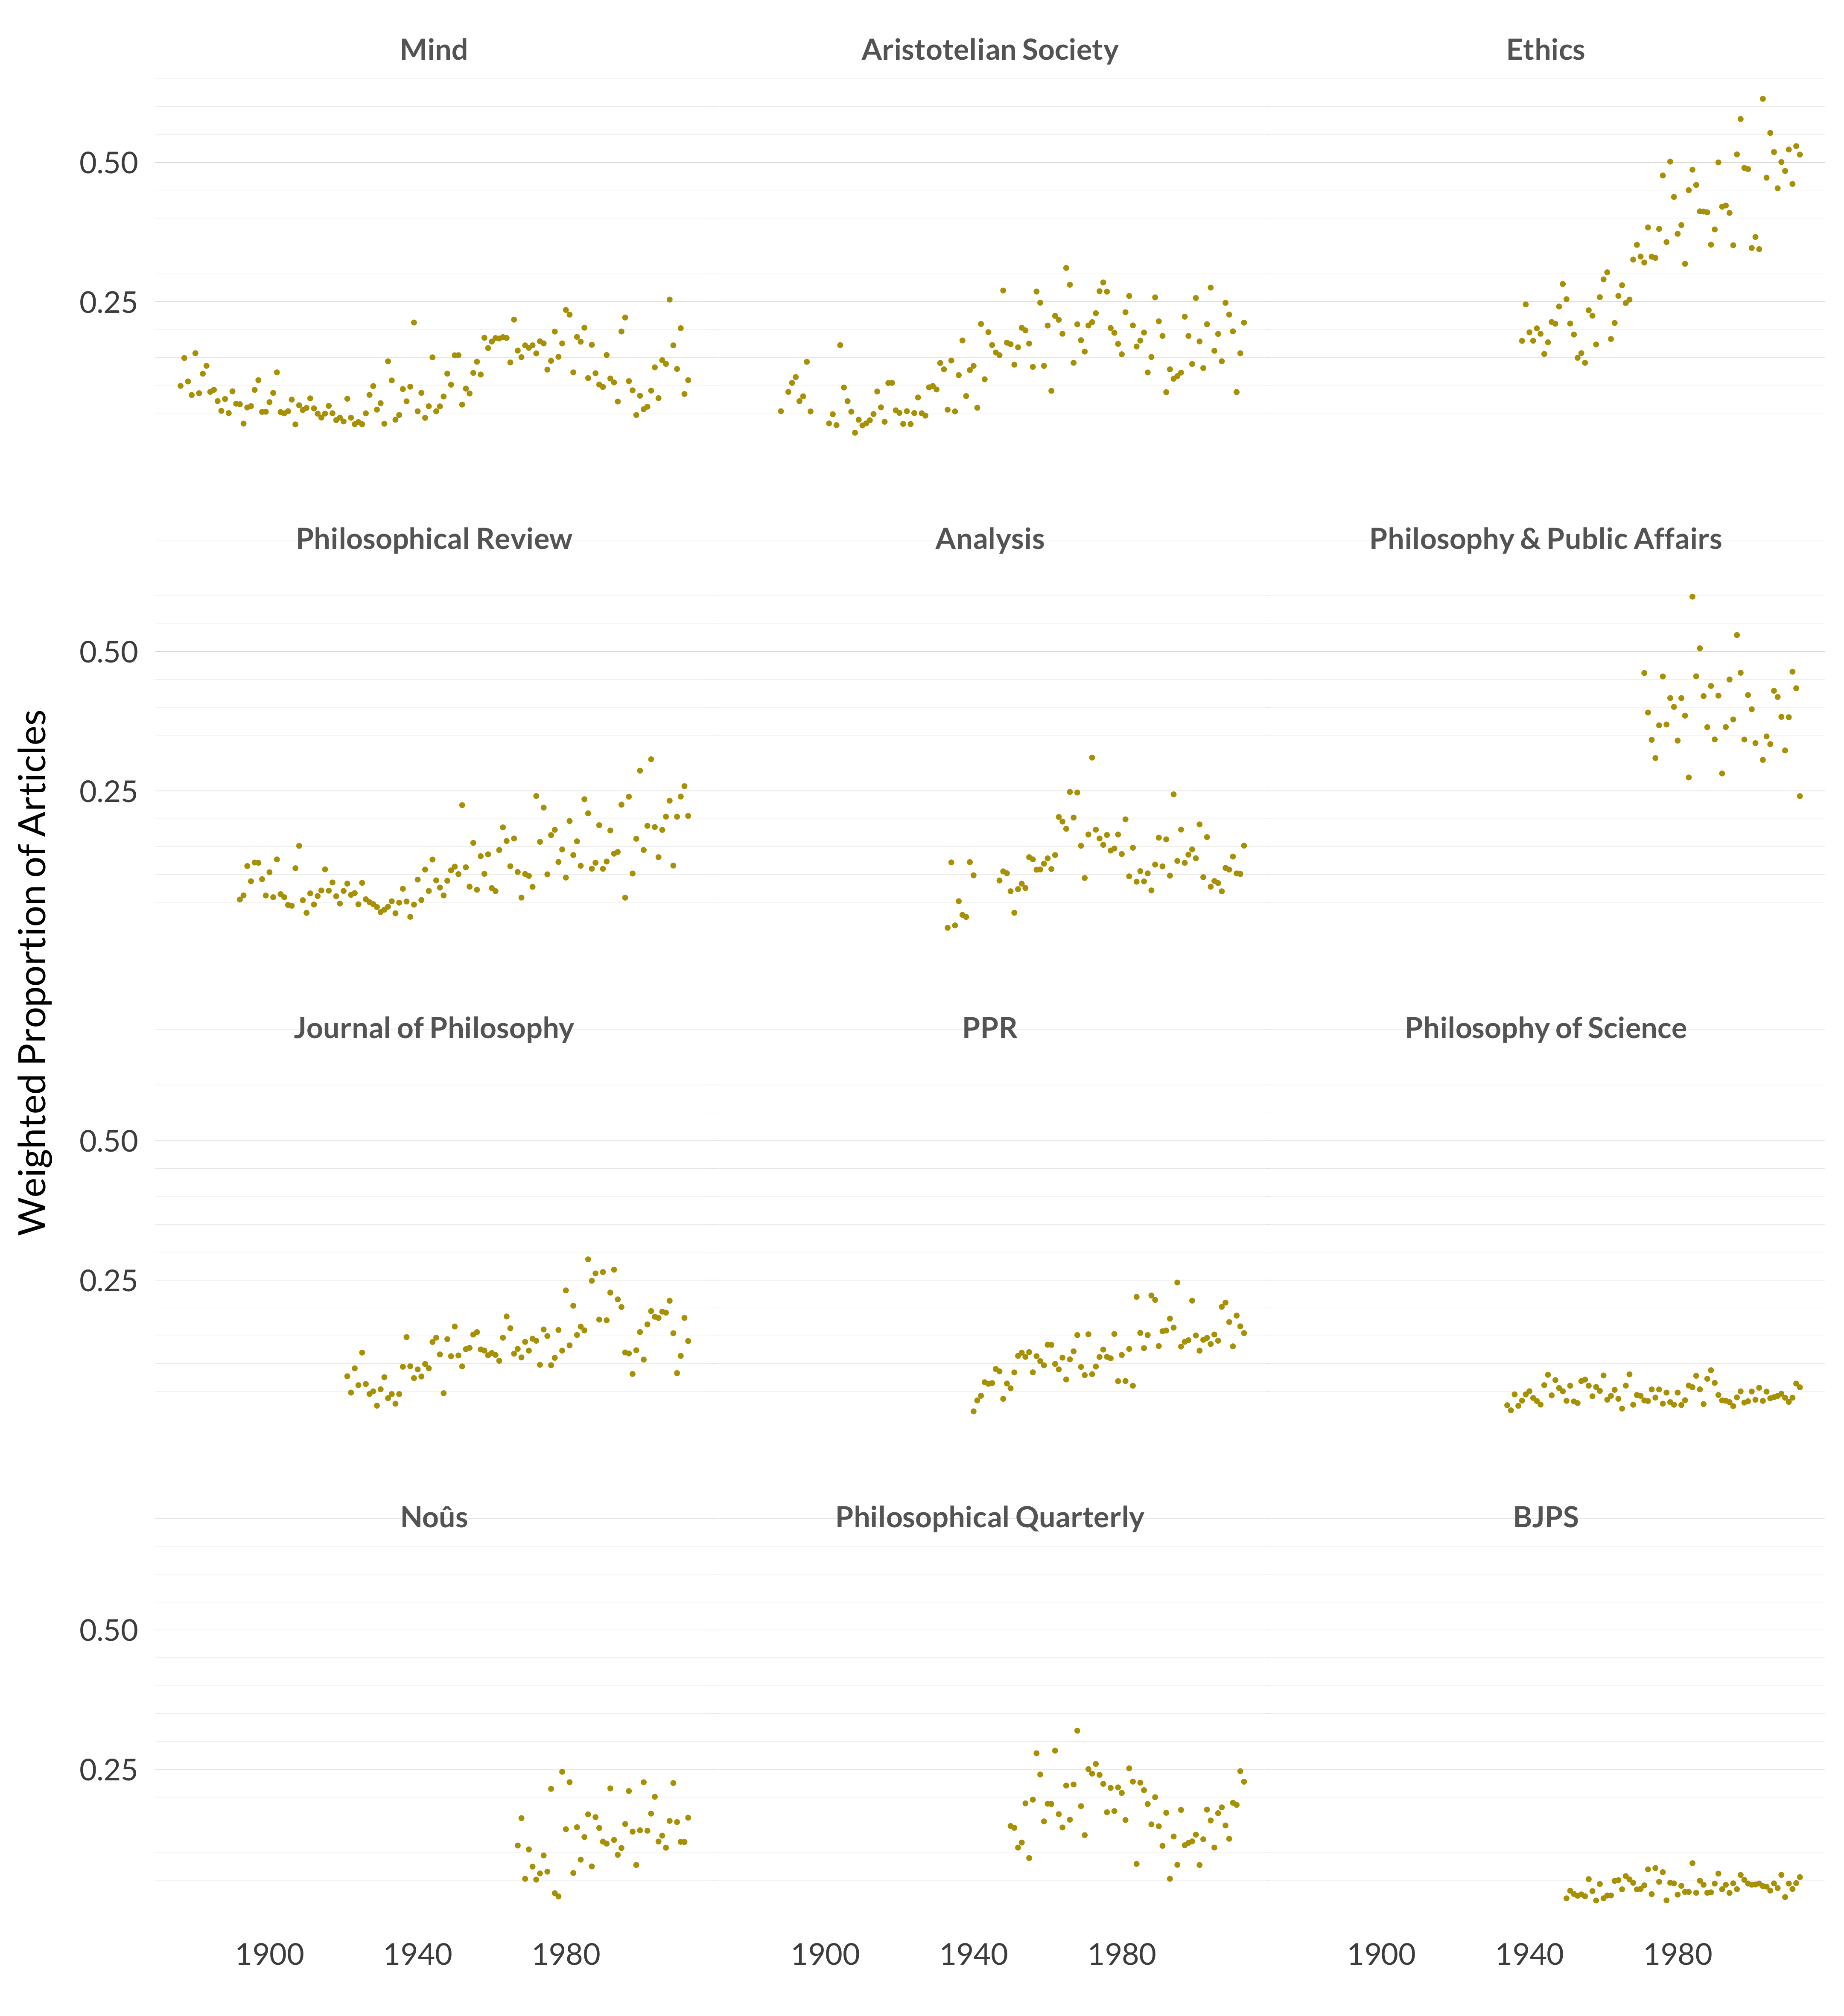 Twelve scatterplots showing which percentage of the articles in each journal in each year are in the category ethics. A brief summary of the data follows. In an average year in Mind, 10.7% of the articles are in the category ethics. Ethics is most prevalent in Mind in 2008 when it accounts for 25.4% of the articles in the journal. And it is least prevalent in 1907 when it accounts for 3.0% of the articles in the journal. In an average year in Proceedings of the Aristotelian Society, 14.4% of the articles are in the category ethics. Ethics is most prevalent in Proceedings of the Aristotelian Society in 1965 when it accounts for 31.1% of the articles in the journal. And it is least prevalent in 1908 when it accounts for 1.5% of the articles in the journal. In an average year in Ethics, 34.6% of the articles are in the category ethics. Ethics is most prevalent in Ethics in 2003 when it accounts for 61.4% of the articles in the journal. And it is least prevalent in 1955 when it accounts for 14.0% of the articles in the journal. In an average year in Philosophical Review, 11.4% of the articles are in the category ethics. Ethics is most prevalent in Philosophical Review in 2003 when it accounts for 30.7% of the articles in the journal. And it is least prevalent in 1938 when it accounts for 2.4% of the articles in the journal. In an average year in Analysis, 12.6% of the articles are in the category ethics. Ethics is most prevalent in Analysis in 1972 when it accounts for 31.0% of the articles in the journal. And it is least prevalent in 1933 when it accounts for 0.4% of the articles in the journal. In an average year in Philosophy and Public Affairs, 39.3% of the articles are in the category ethics. Ethics is most prevalent in Philosophy and Public Affairs in 1984 when it accounts for 59.9% of the articles in the journal. And it is least prevalent in 2013 when it accounts for 24.1% of the articles in the journal. In an average year in Journal of Philosophy, 13.3% of the articles are in the category ethics. Ethics is most prevalent in Journal of Philosophy in 1986 when it accounts for 28.7% of the articles in the journal. And it is least prevalent in 1929 when it accounts for 2.5% of the articles in the journal. In an average year in Philosophy and Phenomenological Research, 12.3% of the articles are in the category ethics. Ethics is most prevalent in Philosophy and Phenomenological Research in 1995 when it accounts for 24.6% of the articles in the journal. And it is least prevalent in 1940 when it accounts for 1.4% of the articles in the journal. In an average year in Philosophy of Science, 4.5% of the articles are in the category ethics. Ethics is most prevalent in Philosophy of Science in 1989 when it accounts for 8.8% of the articles in the journal. And it is least prevalent in 1935 when it accounts for 1.6% of the articles in the journal. In an average year in Noûs, 13.2% of the articles are in the category ethics. Ethics is most prevalent in Noûs in 1979 when it accounts for 24.5% of the articles in the journal. And it is least prevalent in 1978 when it accounts for 2.2% of the articles in the journal. In an average year in The Philosophical Quarterly, 17.6% of the articles are in the category ethics. Ethics is most prevalent in The Philosophical Quarterly in 1968 when it accounts for 31.9% of the articles in the journal. And it is least prevalent in 1993 when it accounts for 5.3% of the articles in the journal. In an average year in British Journal for the Philosophy of Science, 4.0% of the articles are in the category ethics. Ethics is most prevalent in British Journal for the Philosophy of Science in 1984 when it accounts for 8.1% of the articles in the journal. And it is least prevalent in 1958 when it accounts for 1.4% of the articles in the journal. 